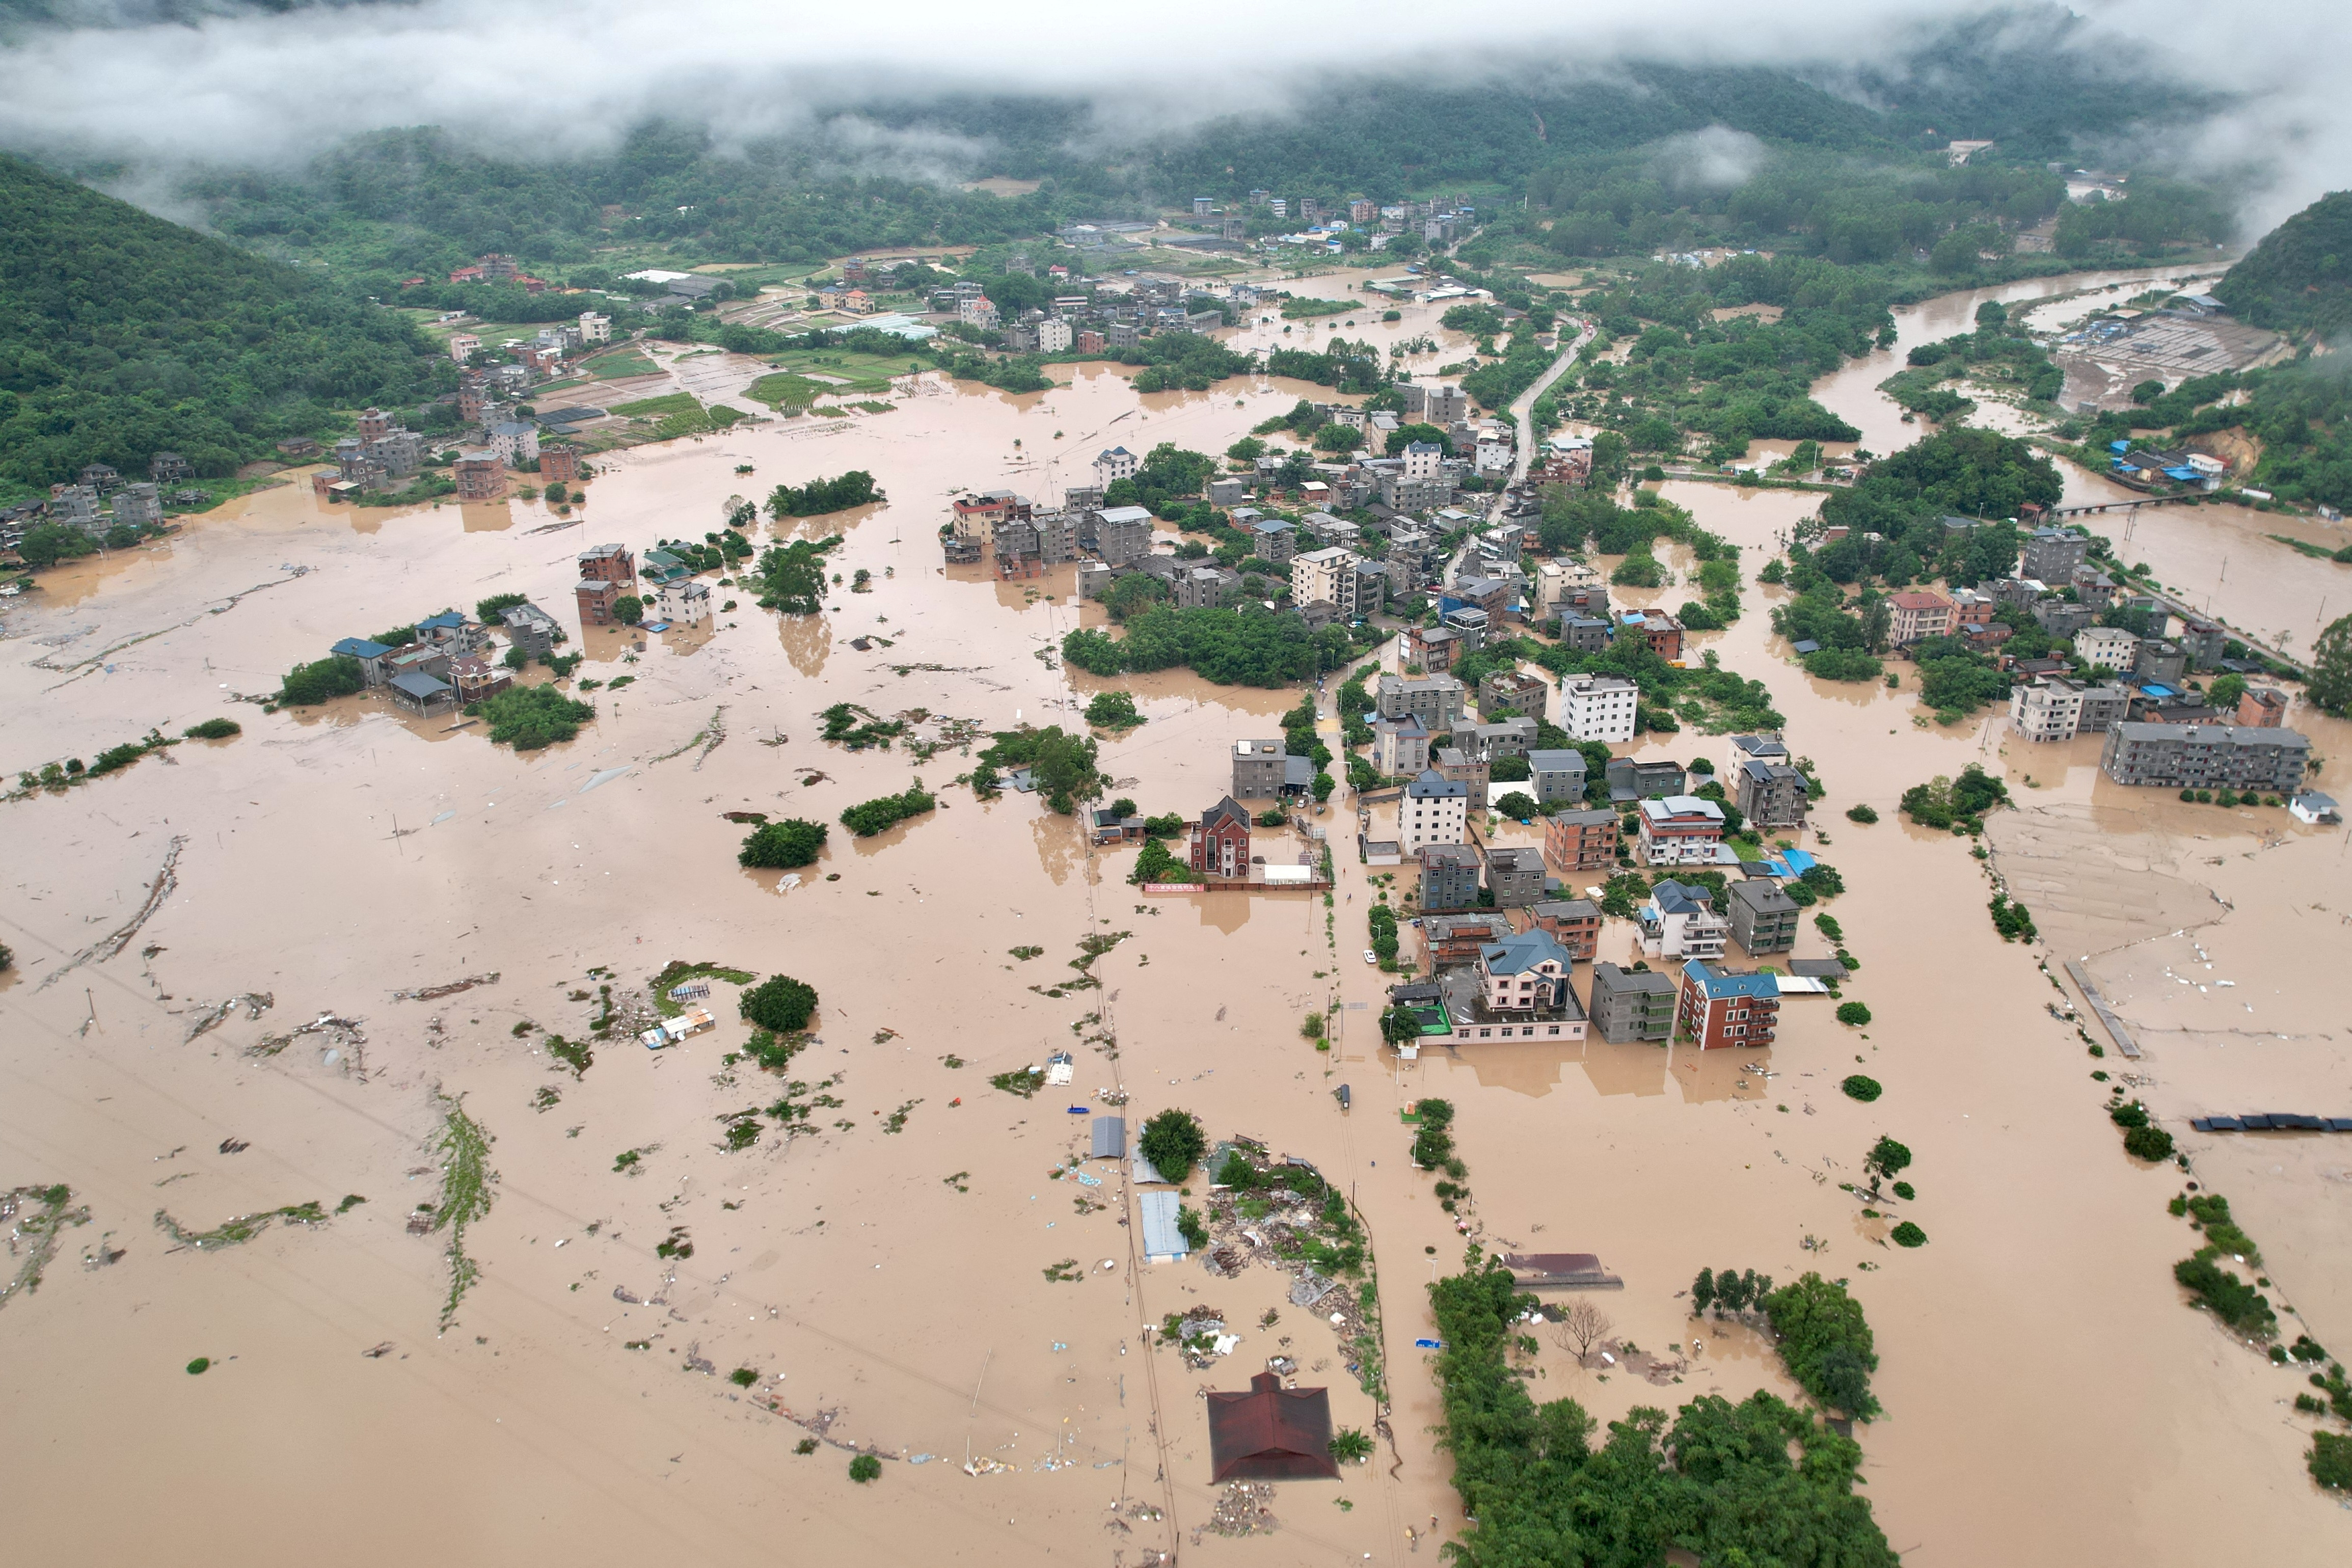 Flooded villages in Minhou county after heavy rains brought by typhoon Haikui